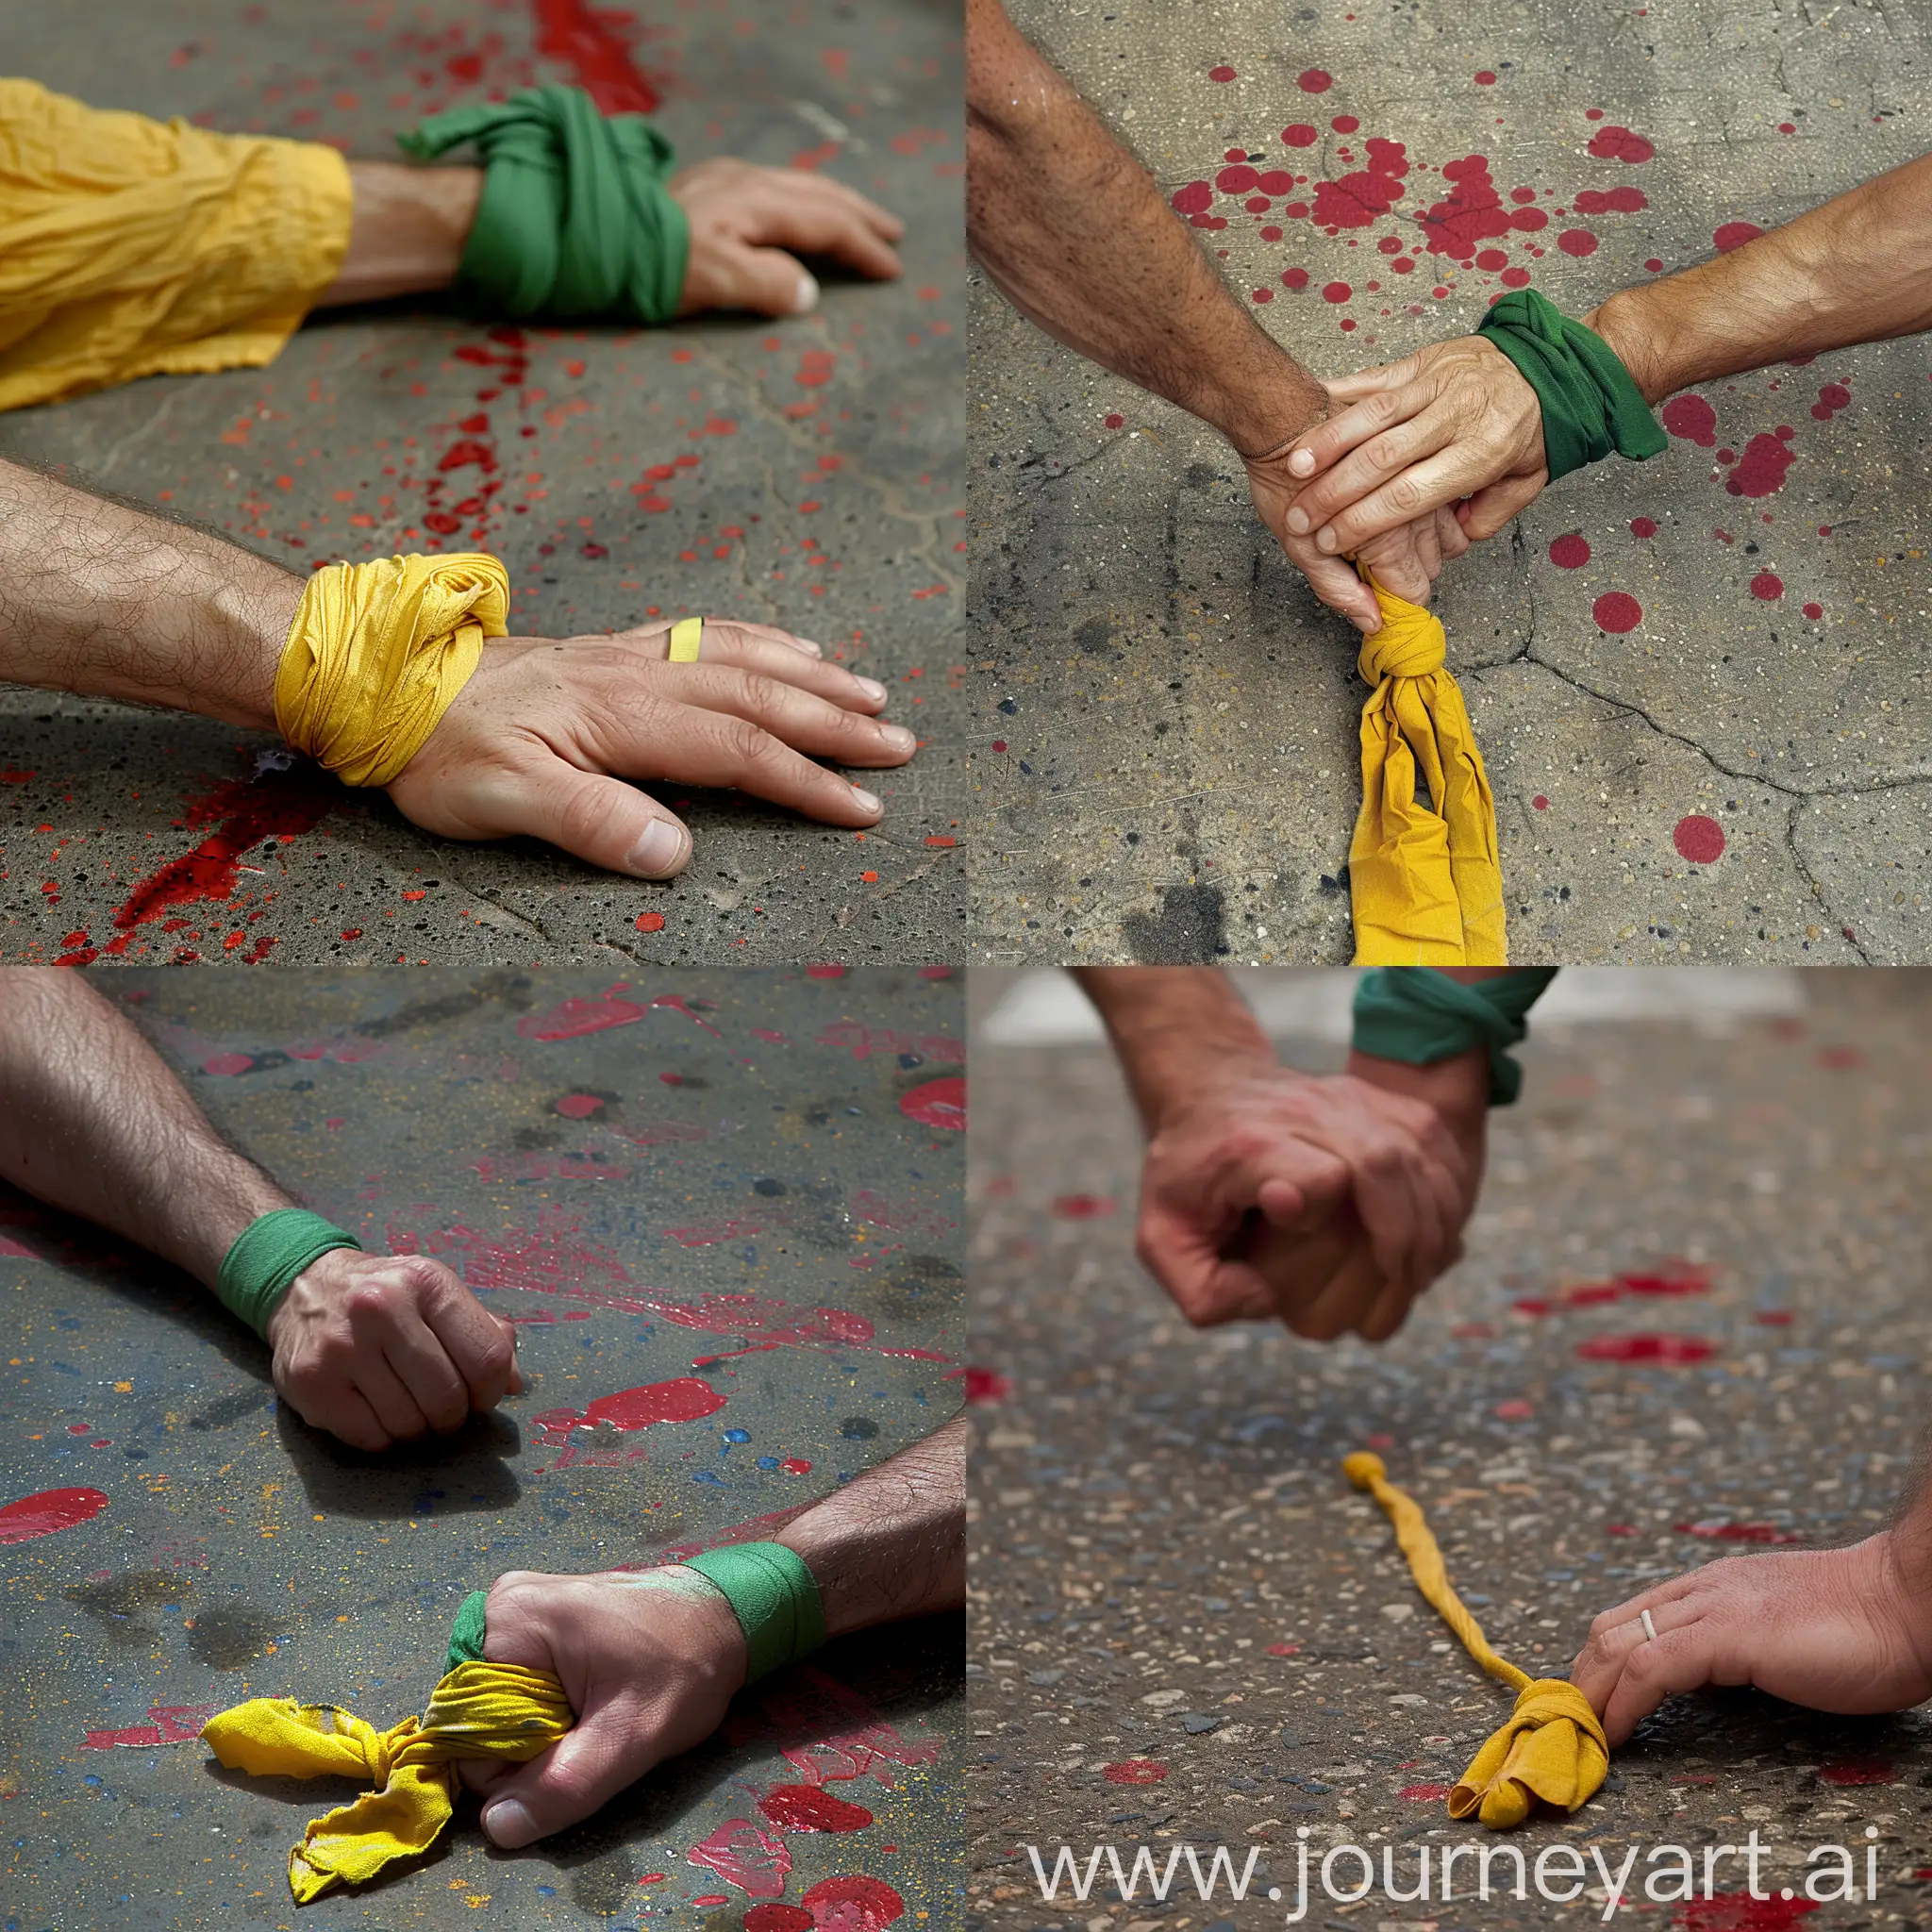 On the asphalt floor, at the bottom there is a man's hand at the joint with a yellow cloth band tied, at the top there is another man's hand with a green cloth band tied at the joint.  On the ground there are red spots.